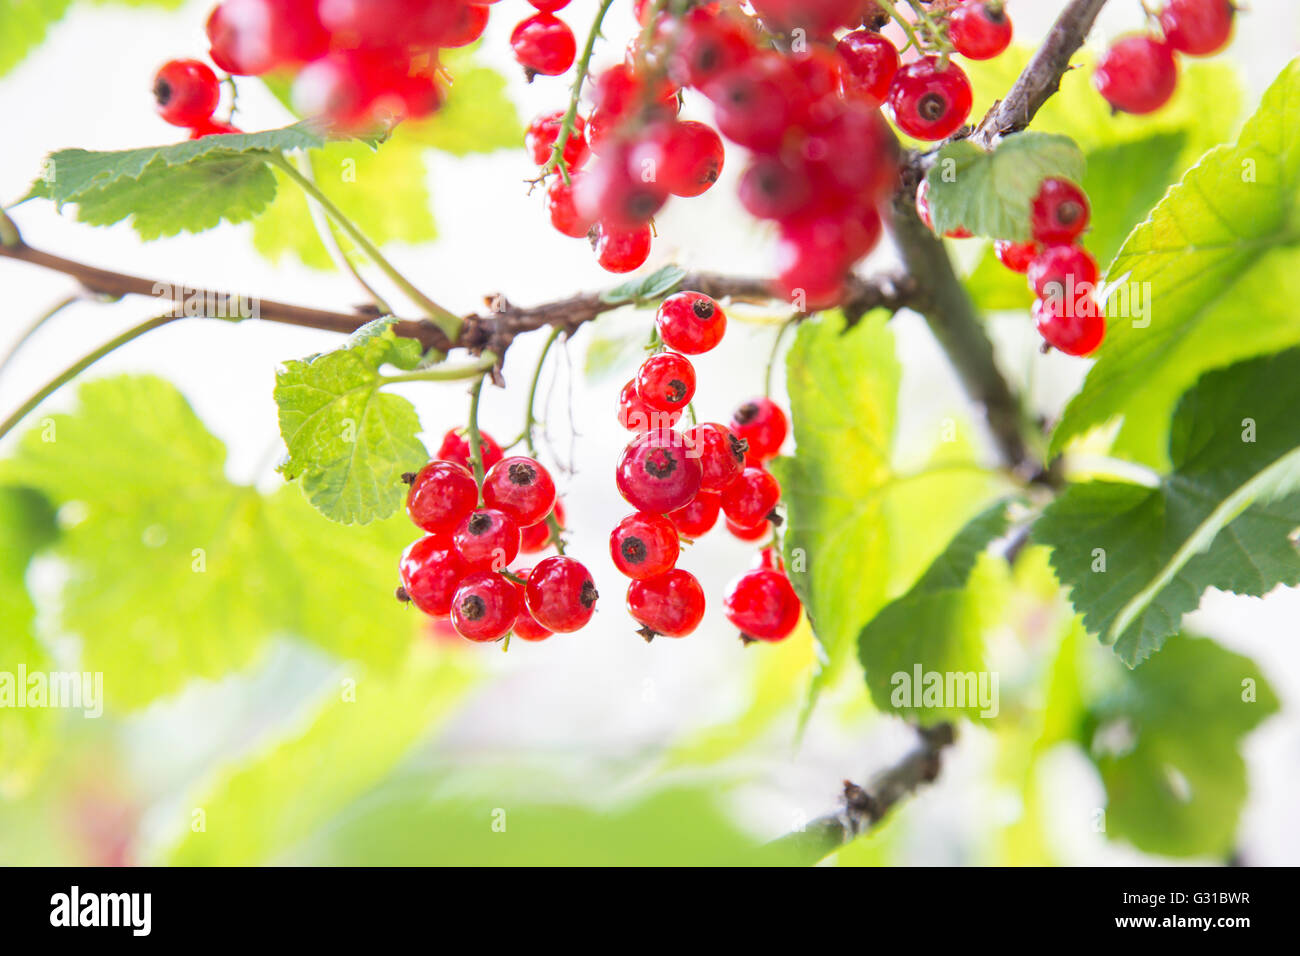 Close-up of delicious ripe redcurrant berries on tree branch Stock Photo